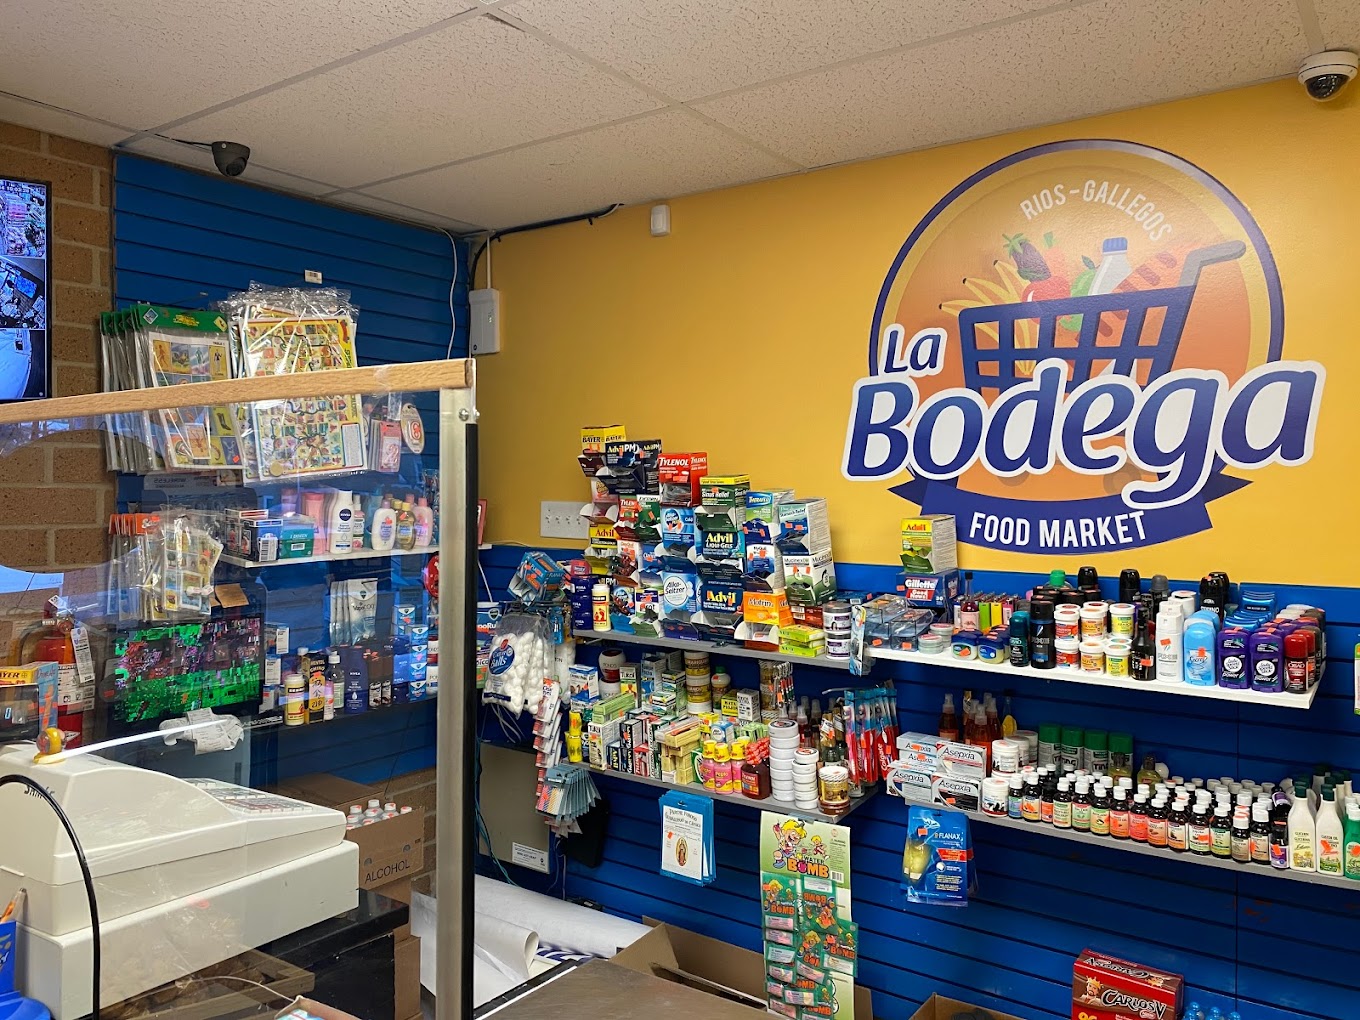 LA BODEGA - Food Market one of the top 10 mexican grocery stores in chicago